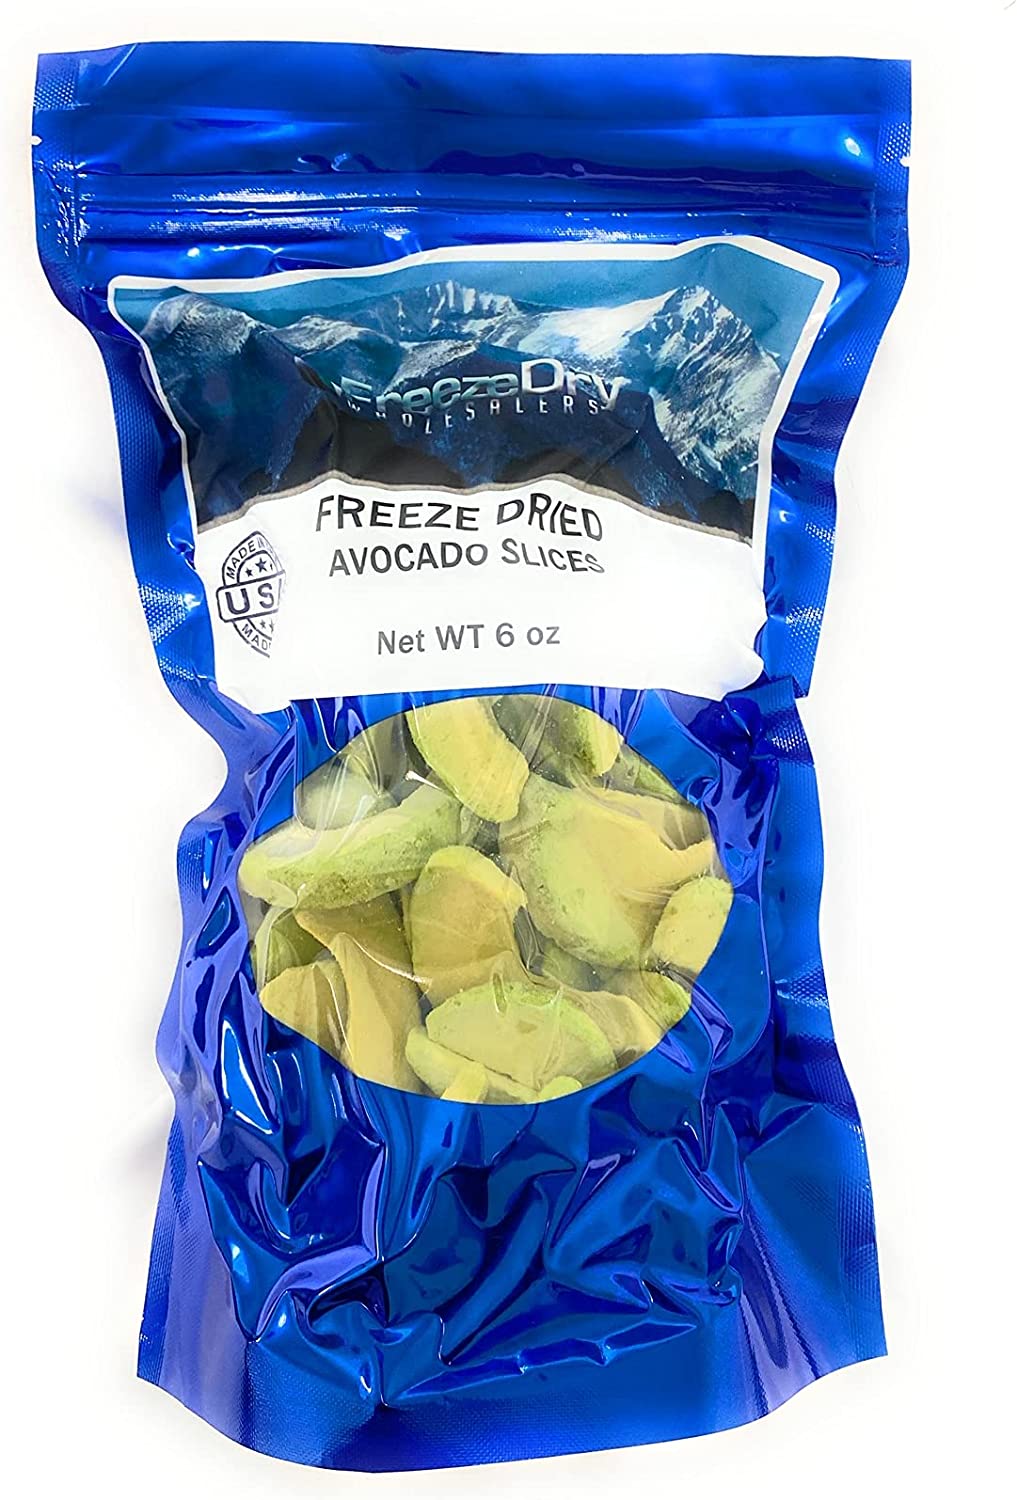 Freeze Dry Wholesalers Freeze Dried Avocado Slices | Backpacking & Camping Food | Family Size Emergency Food